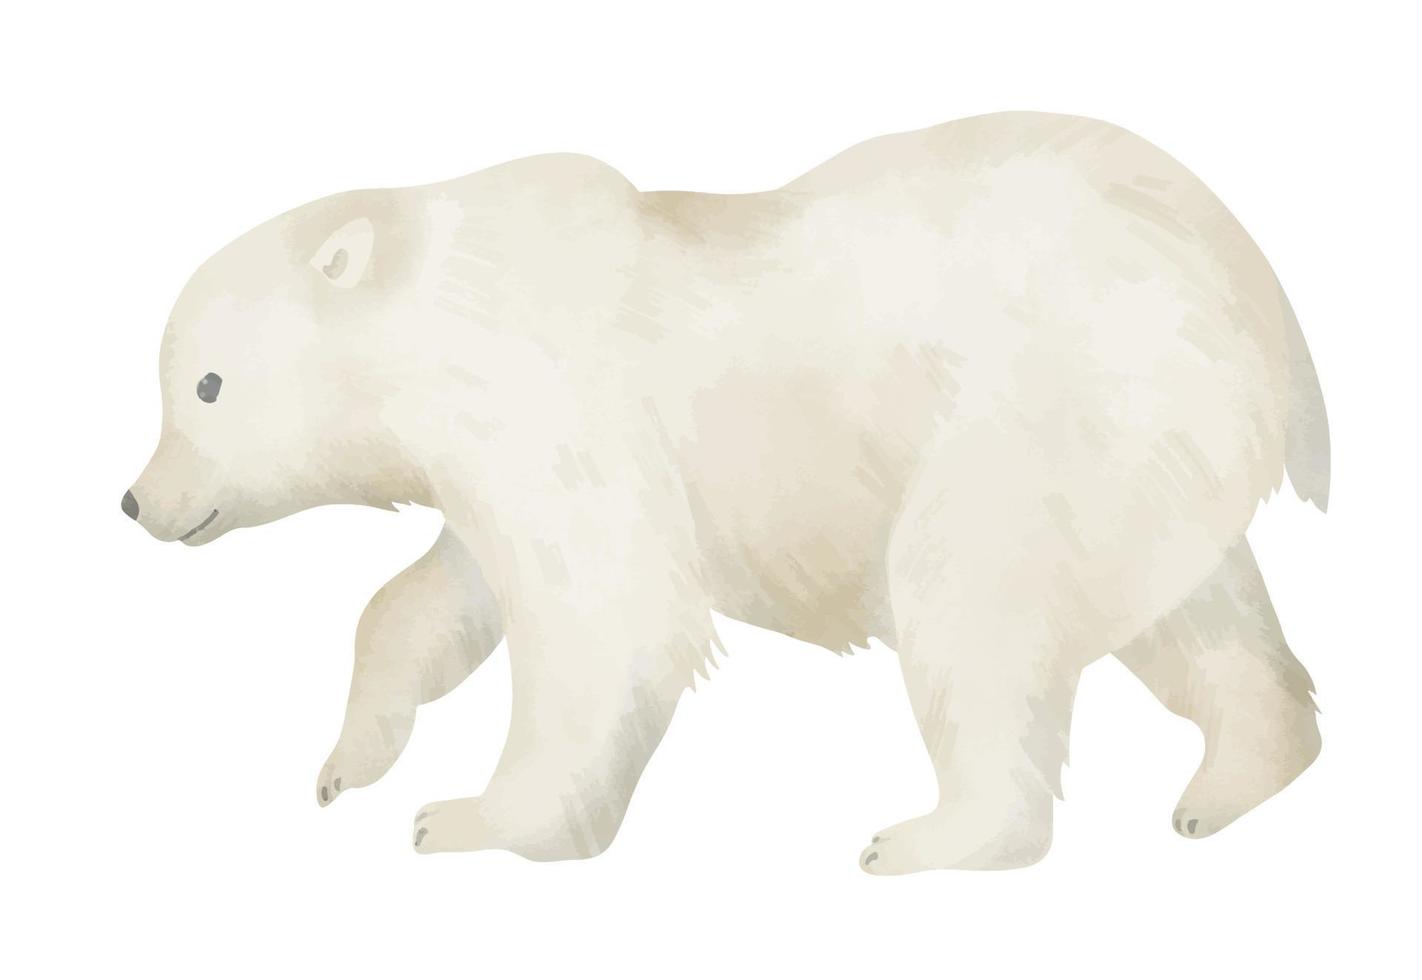 Little white Bear Cub on isolated background. Hand drawn watercolor illustration of baby animal for ecological logo or zoology drawings. Young northern mammal predator. Character in pastel colors vector